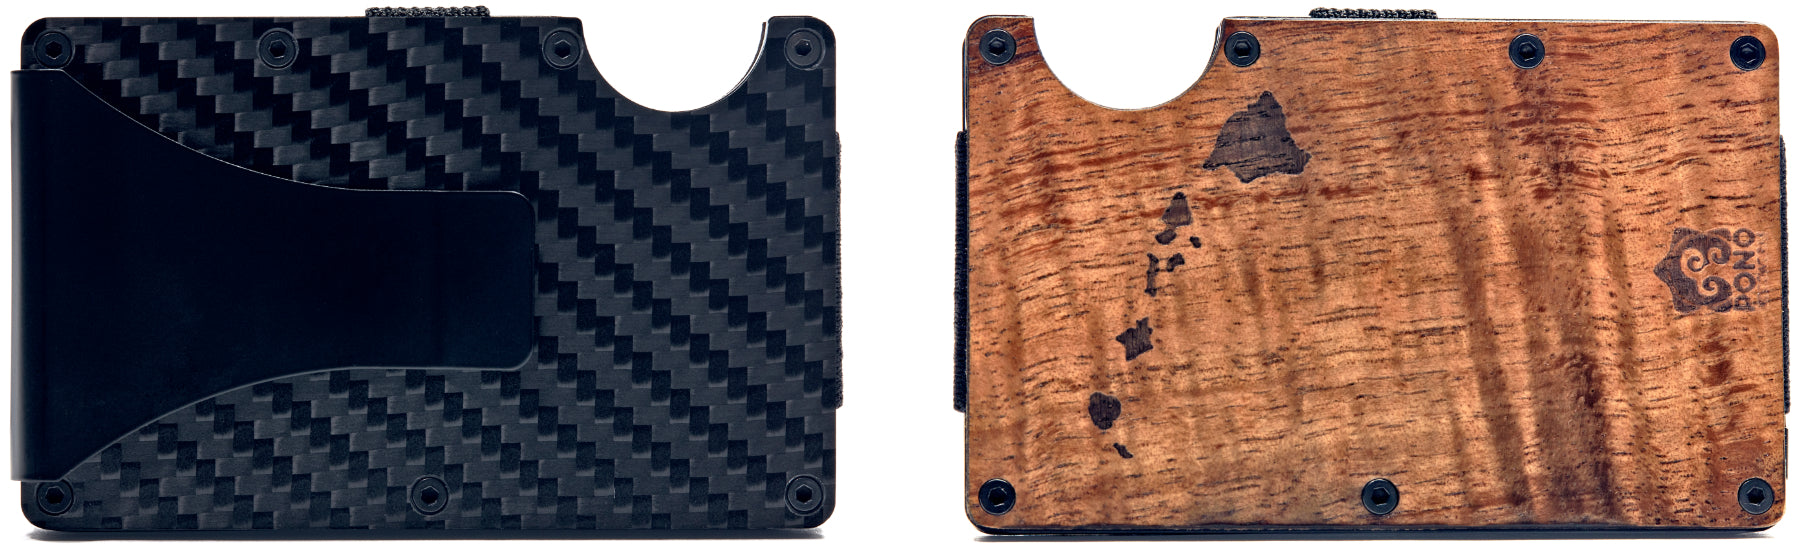 front and back view of koa wood wallet in one banner